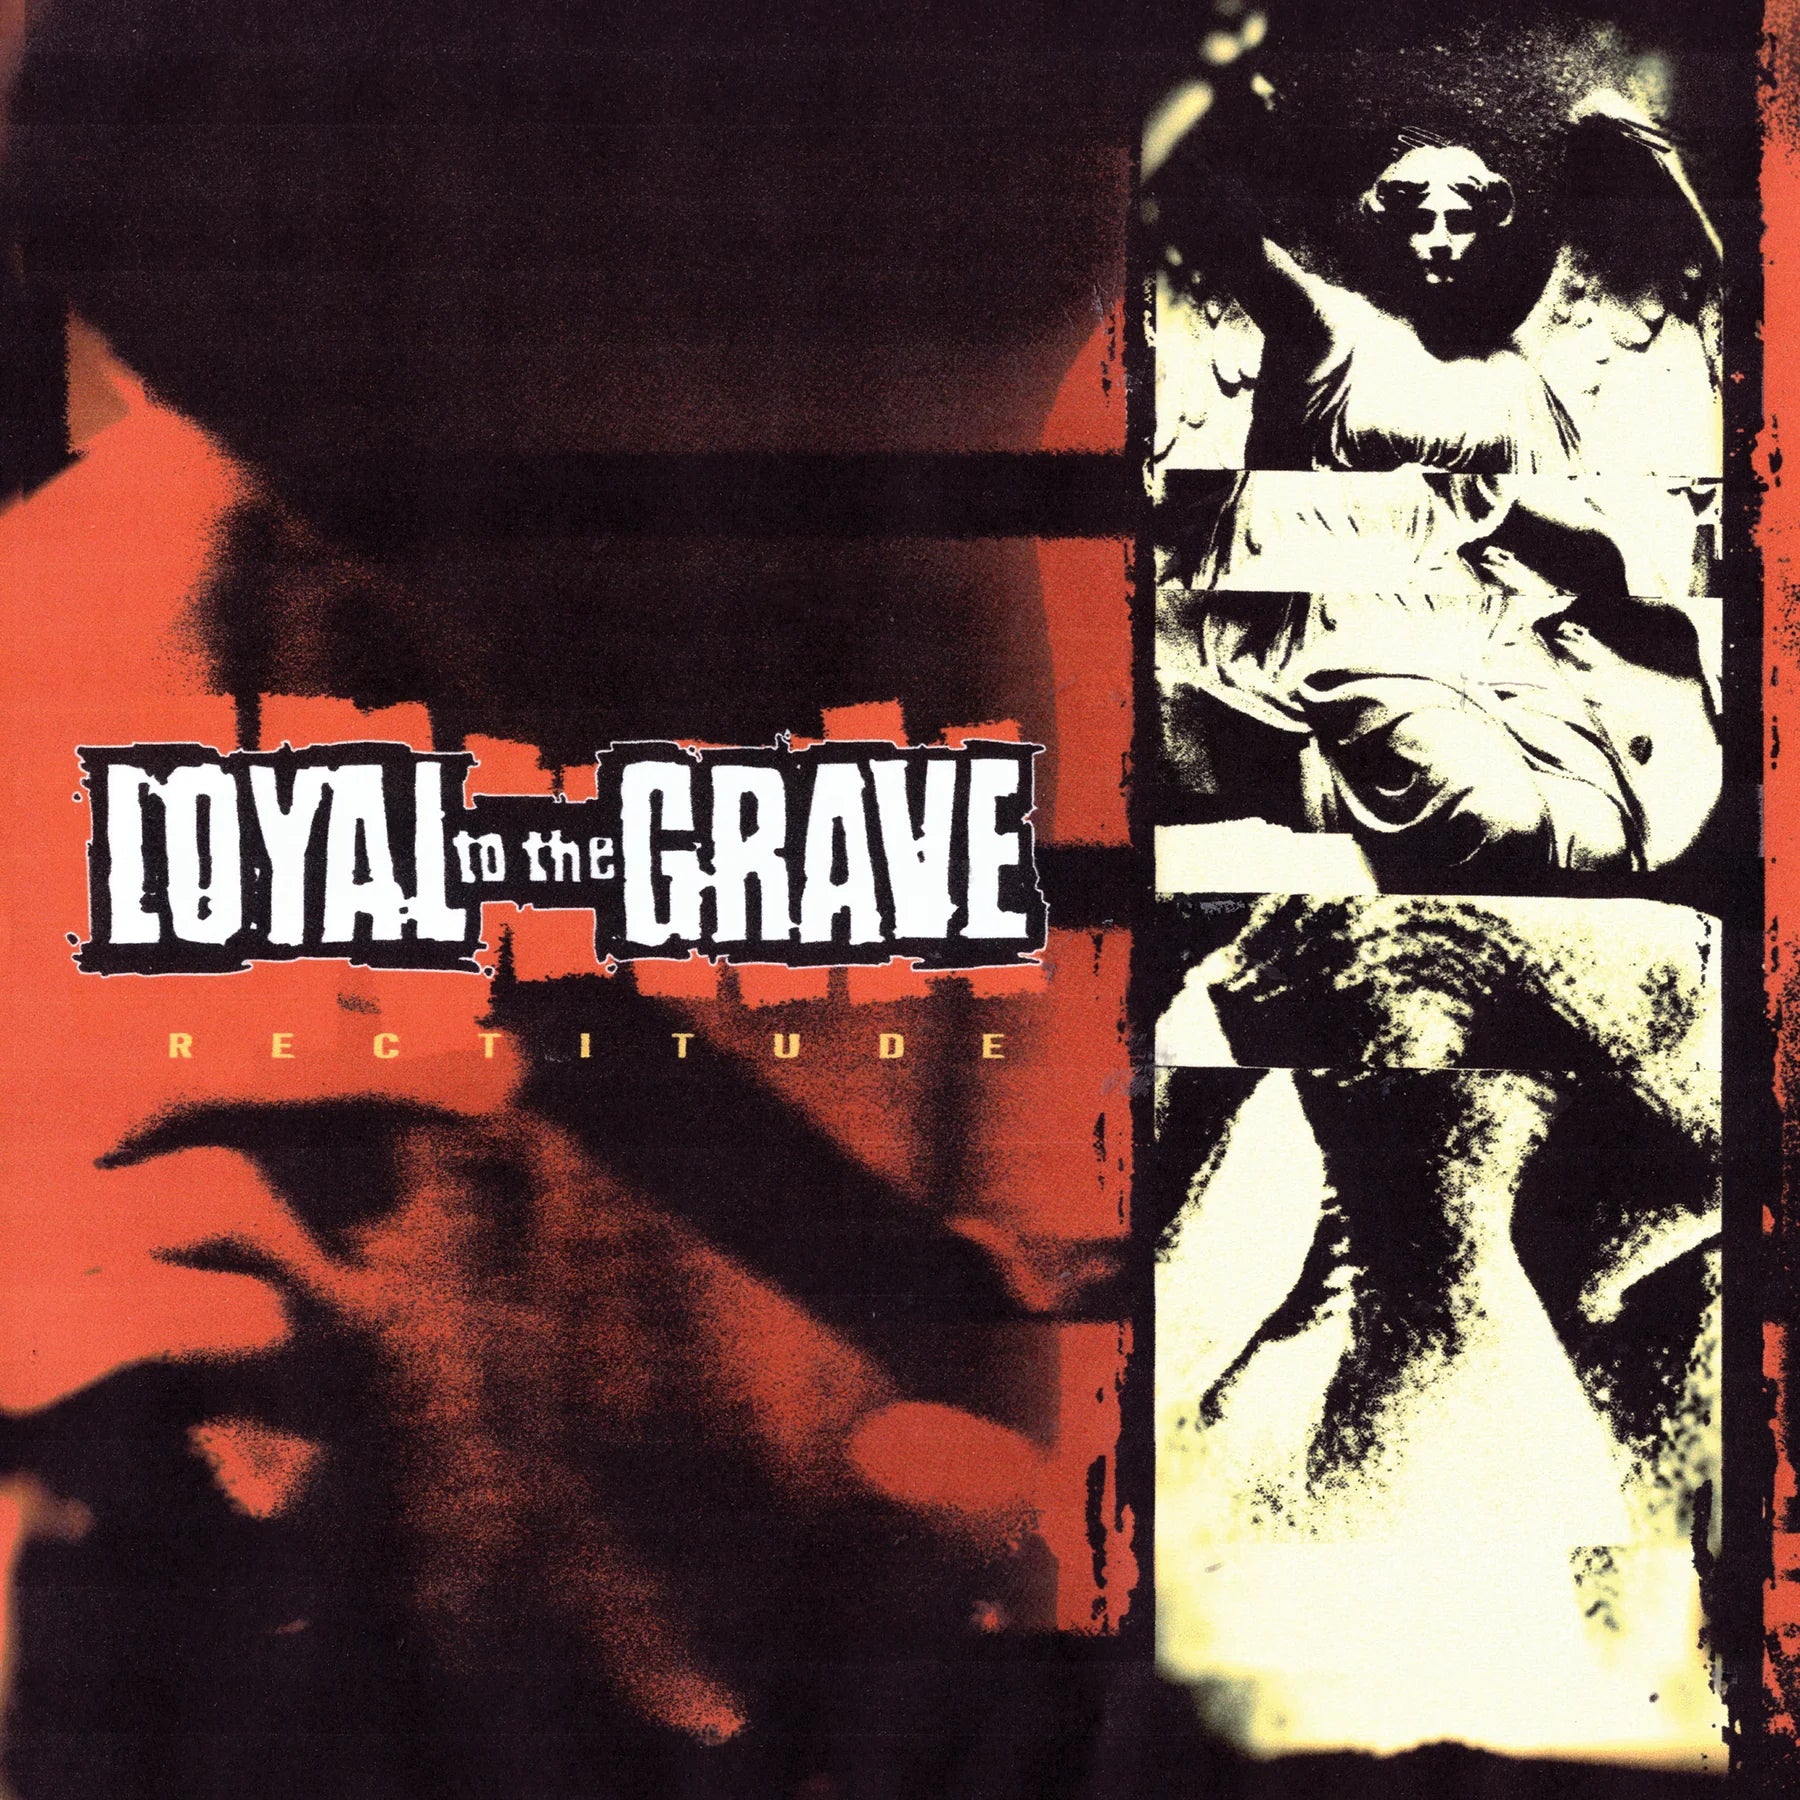 LOYAL TO THE GRAVE "Rectitude" LP